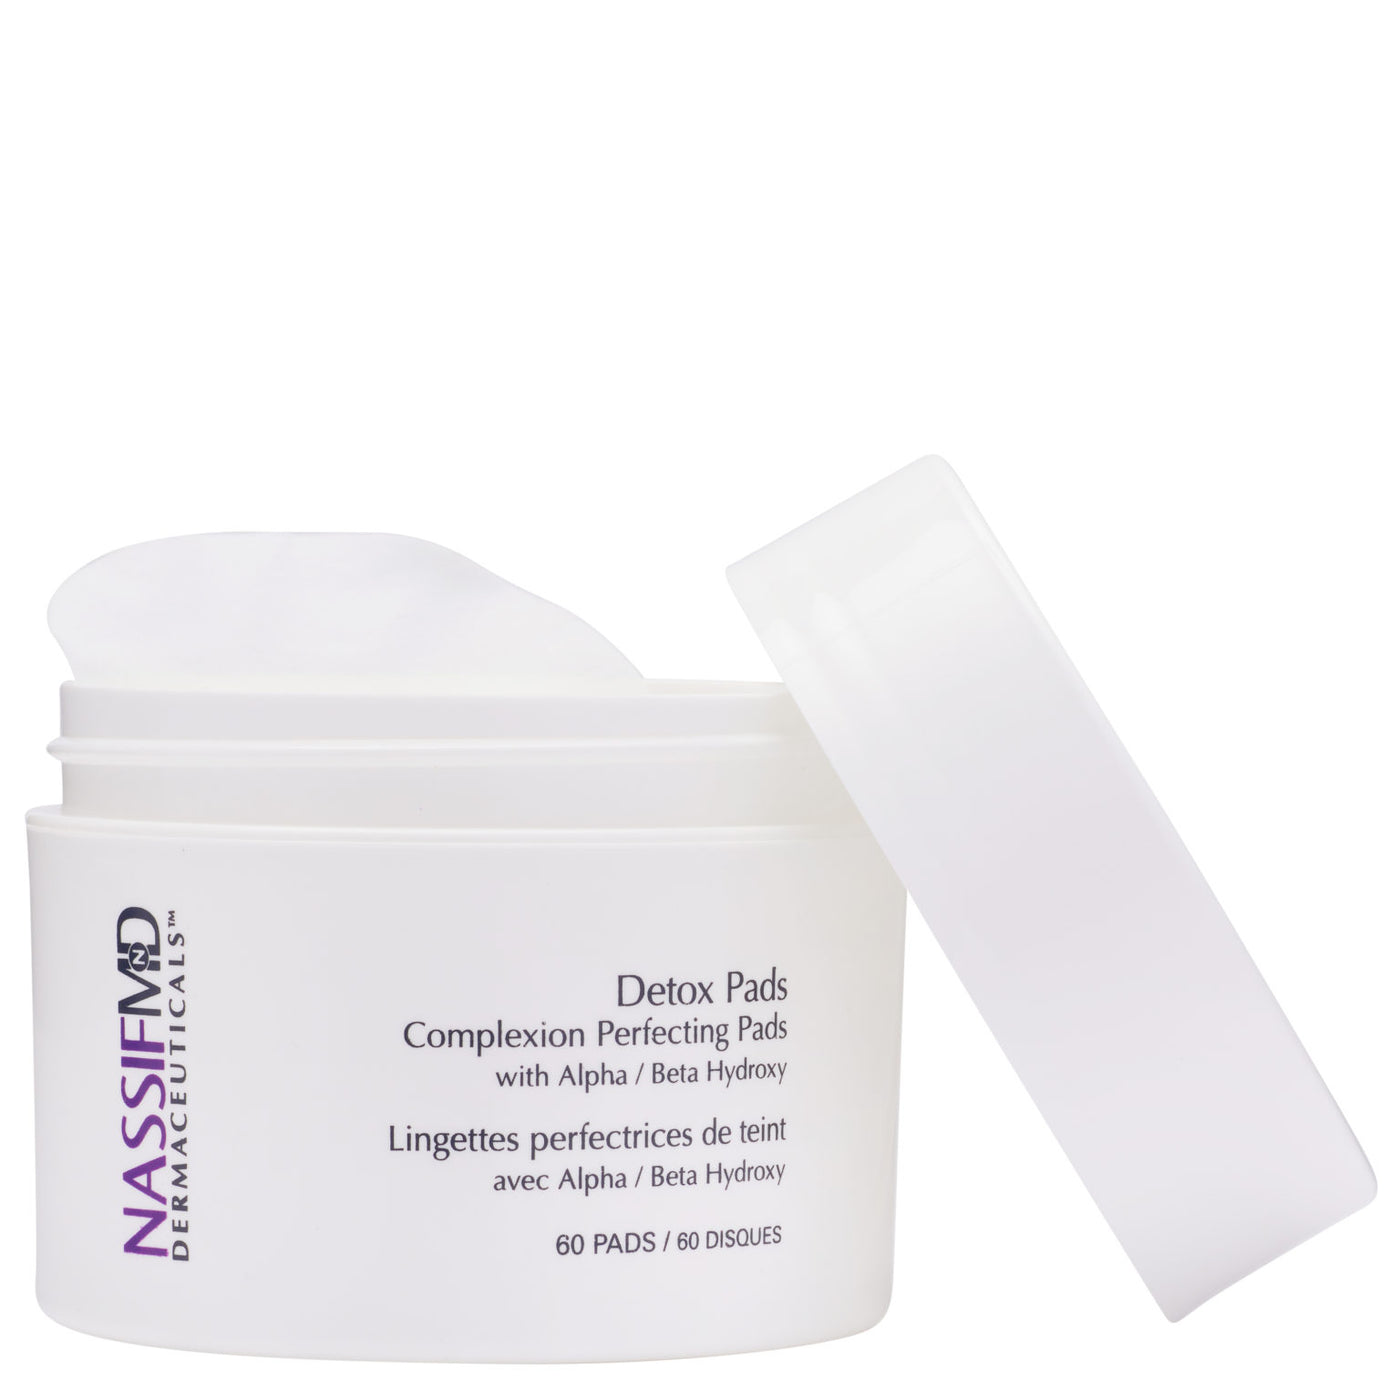 DR. NASSIF – COMPLEXION PERFECTING DETOXIFICATION PADS